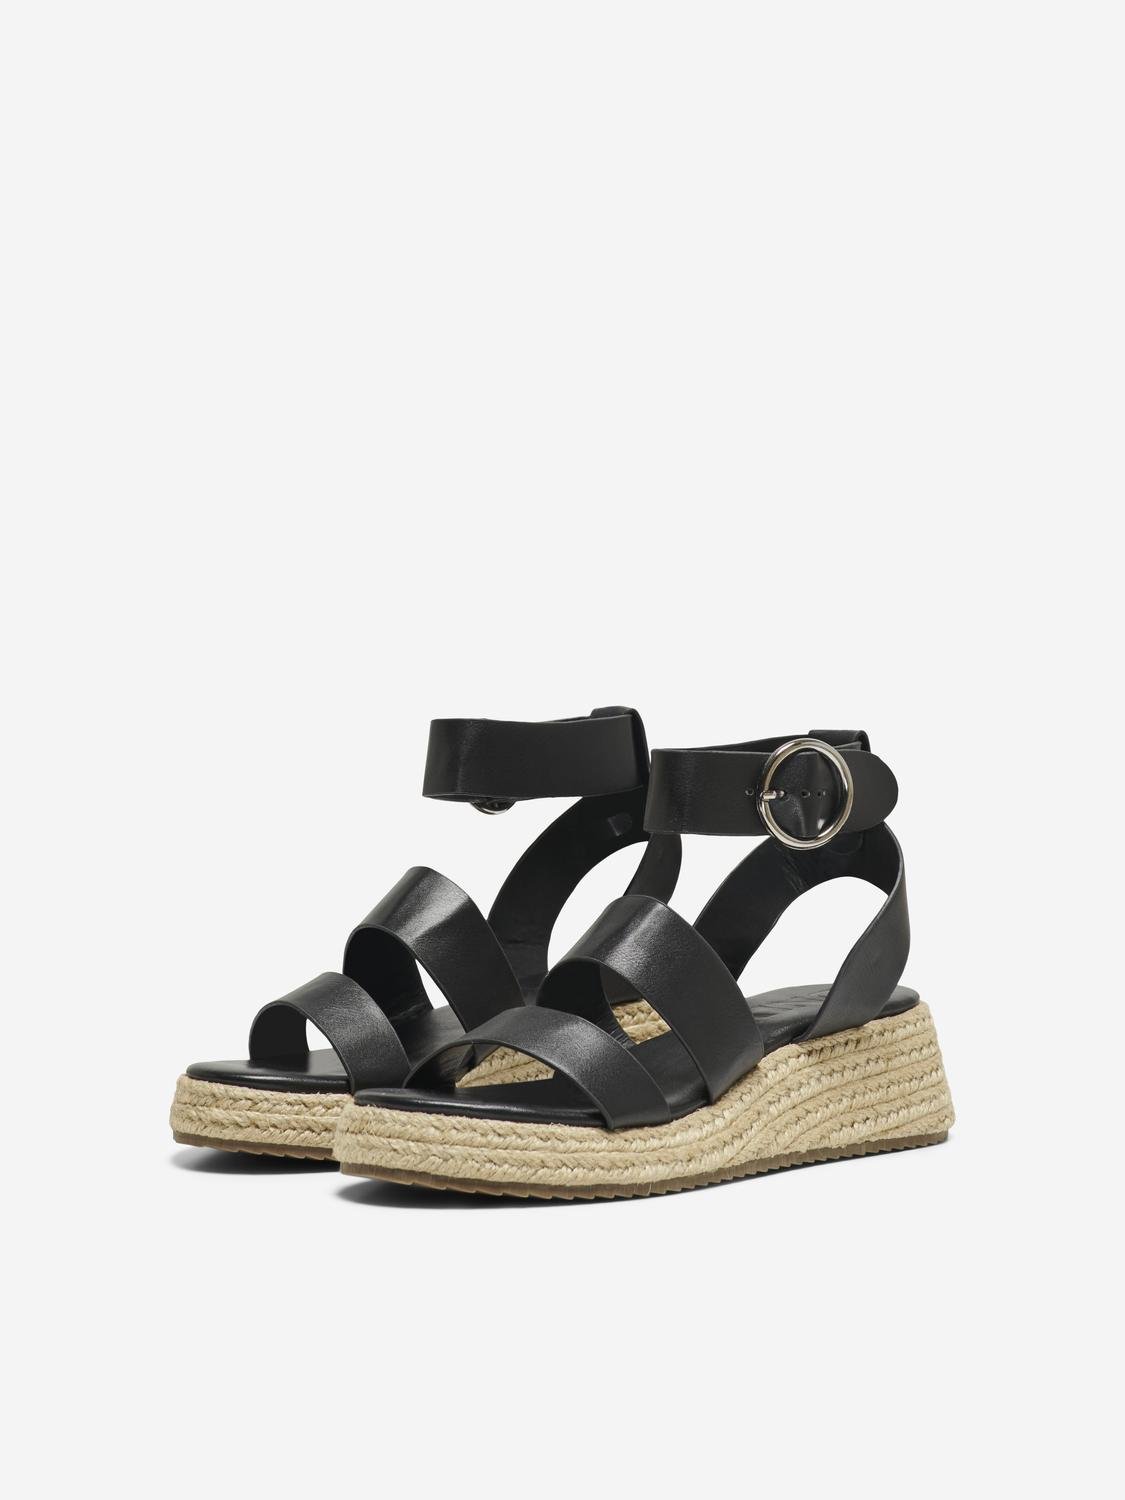 ONLY Sandals with buckle -Black - 15320197